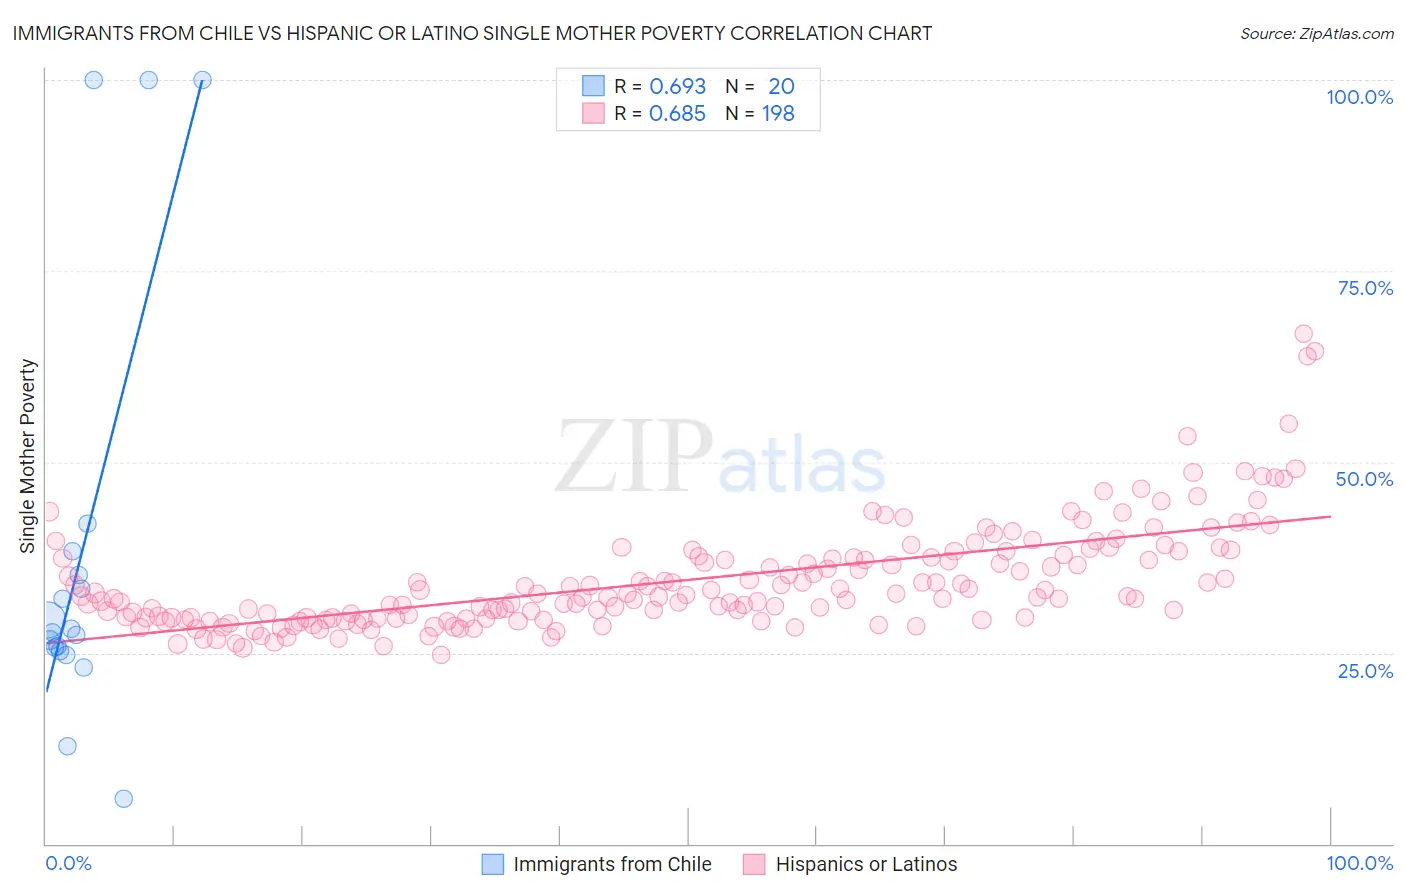 Immigrants from Chile vs Hispanic or Latino Single Mother Poverty